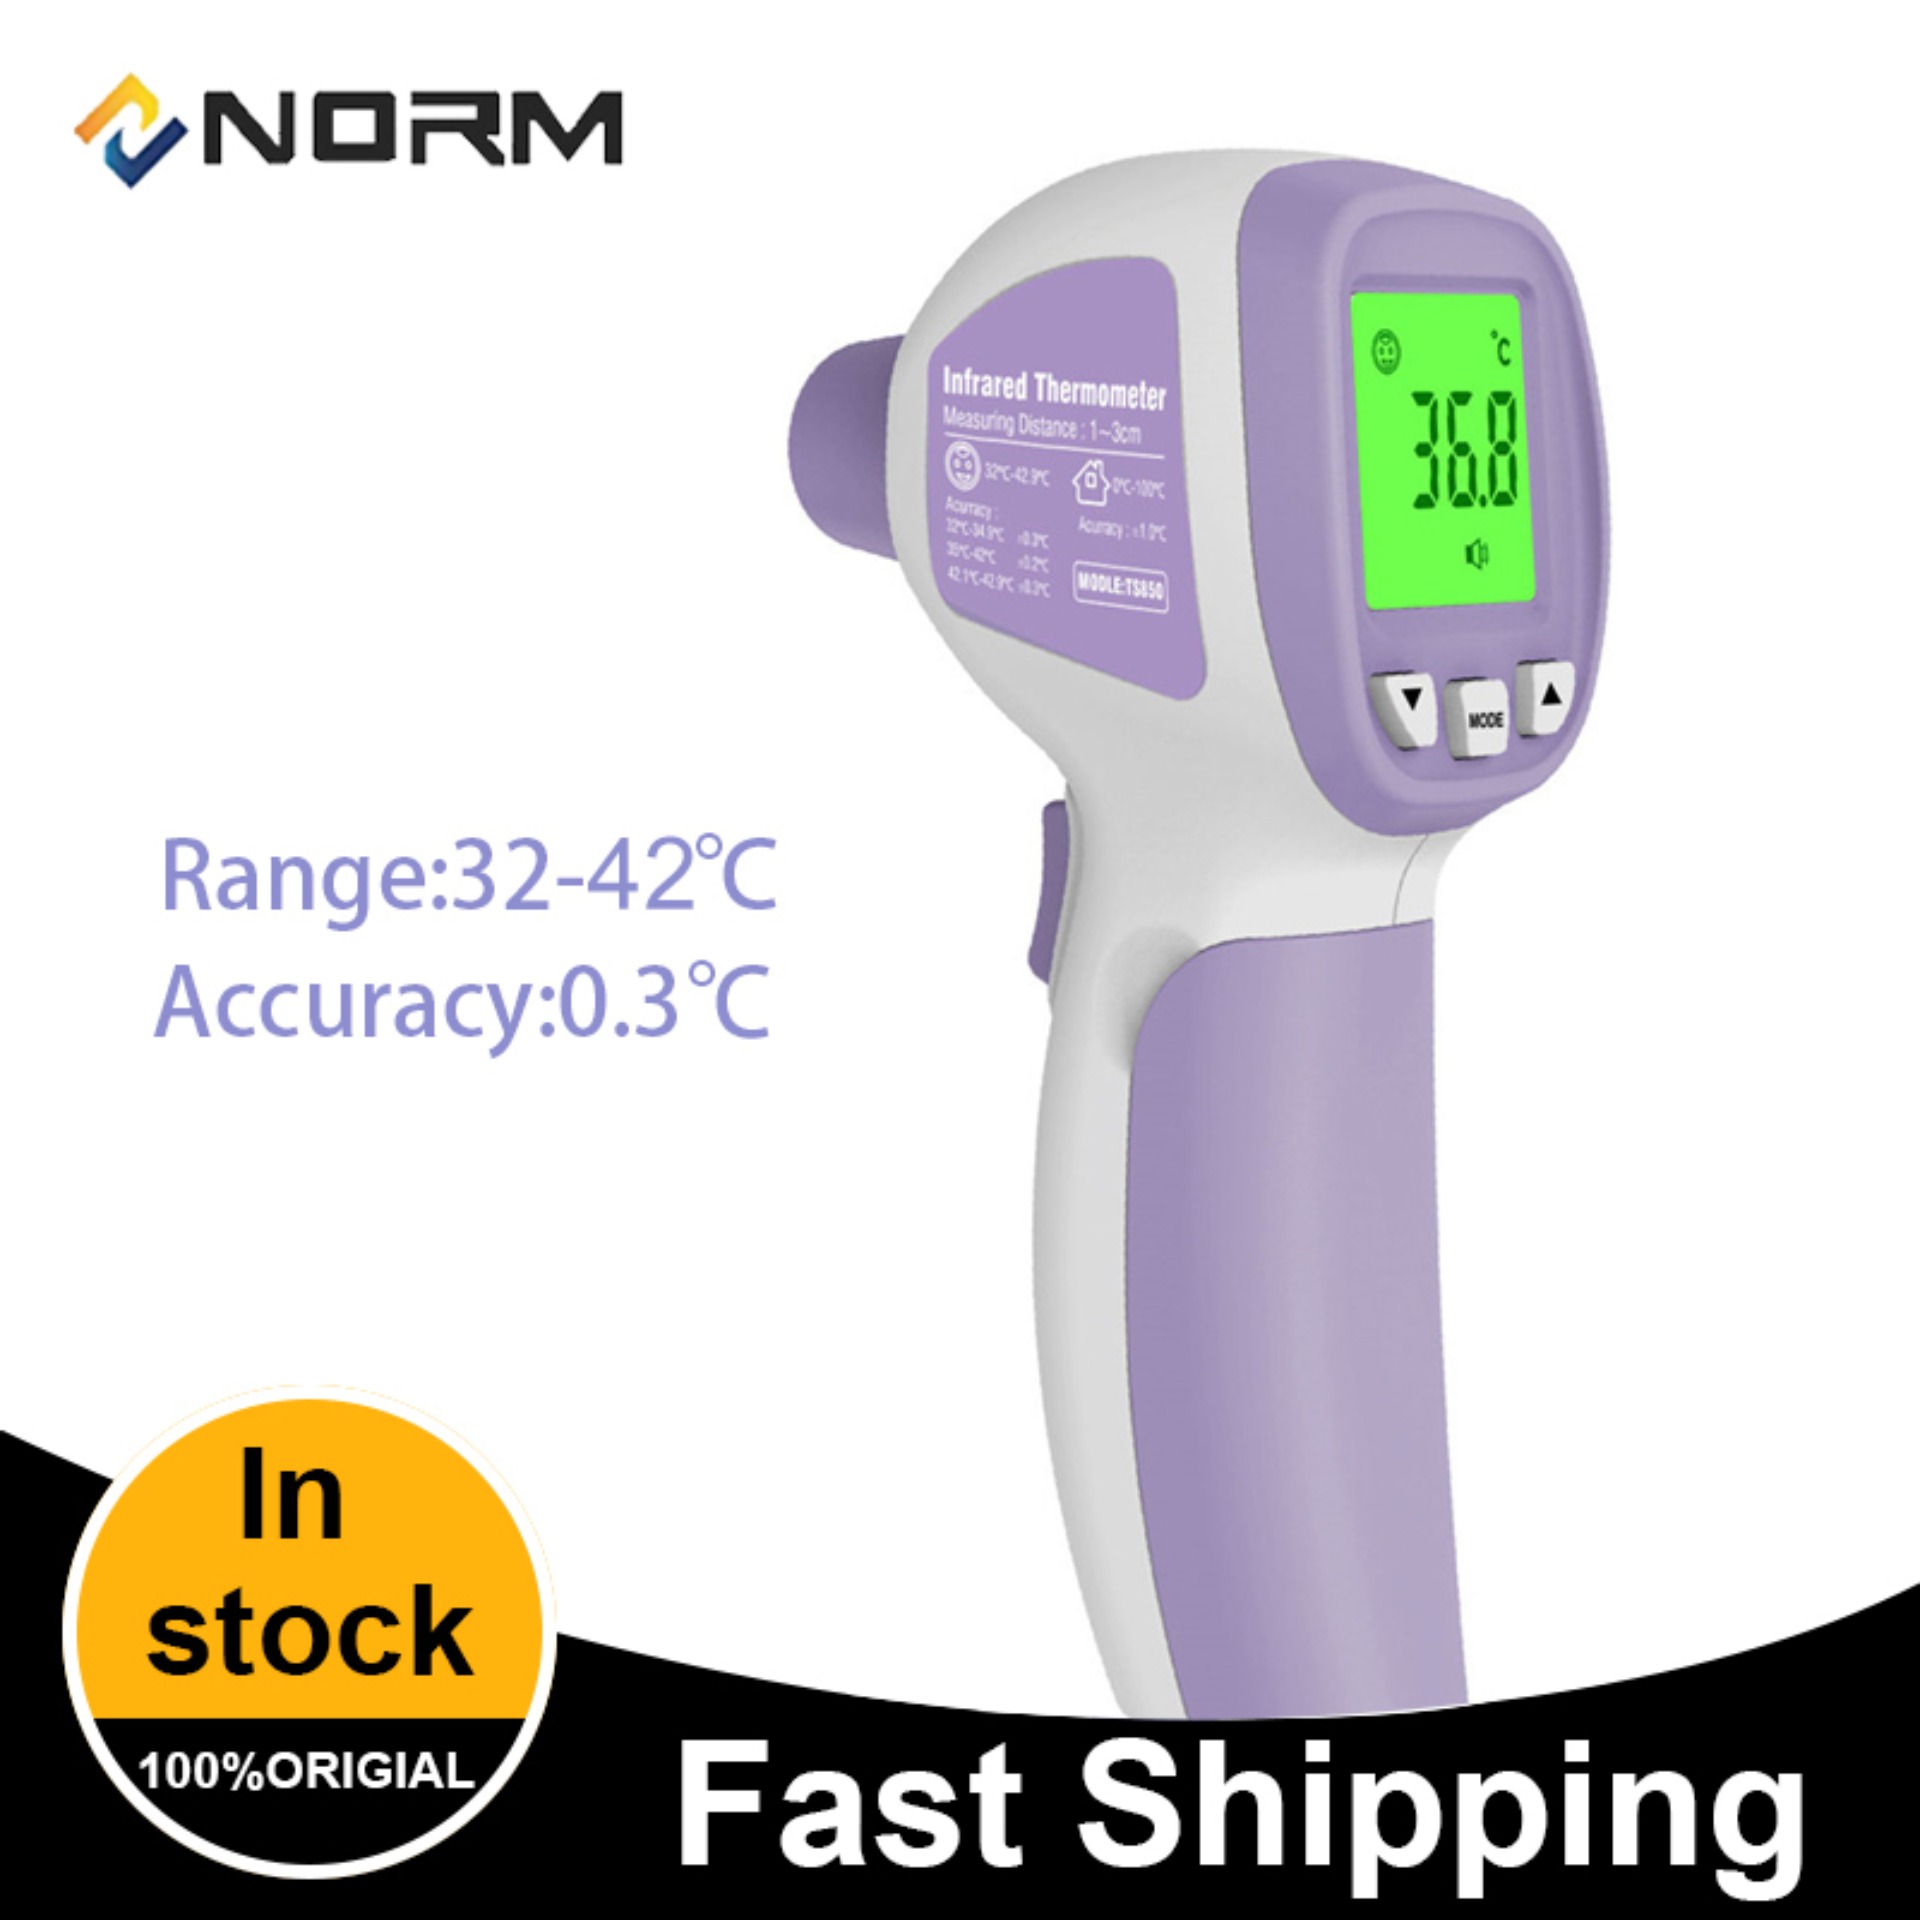 NEW DIGITAL LCD CELCIUS THERMOMETER TEMPERATURE METER TEMP PROBE C SHIP FROM USA 